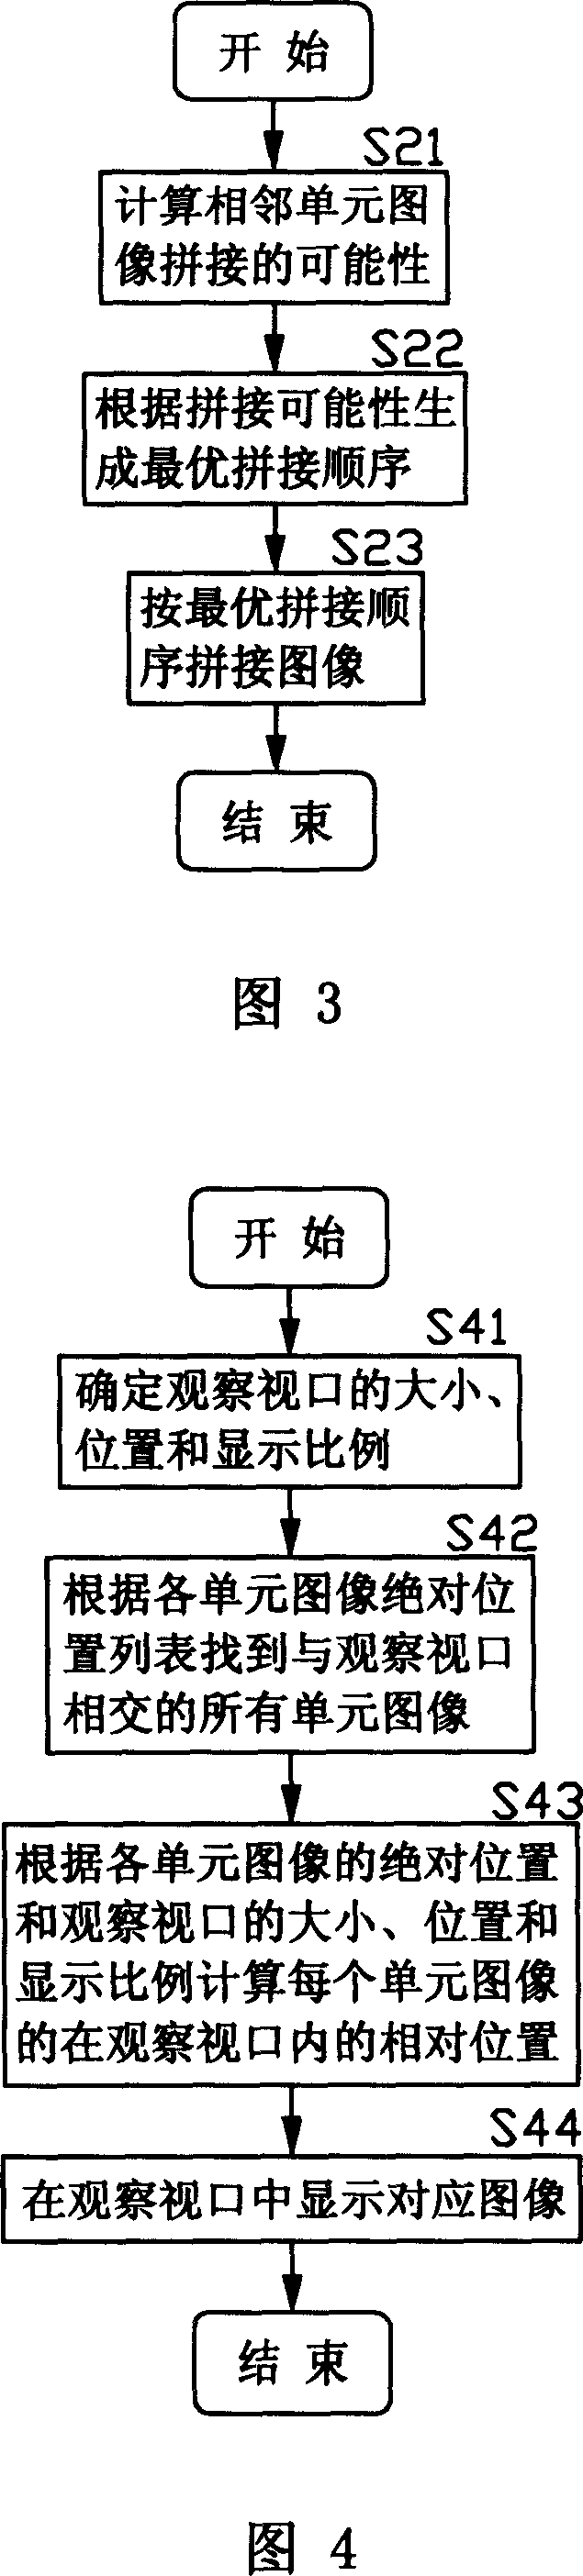 Splice, storage, and browsing method for full-automatic microscopic image